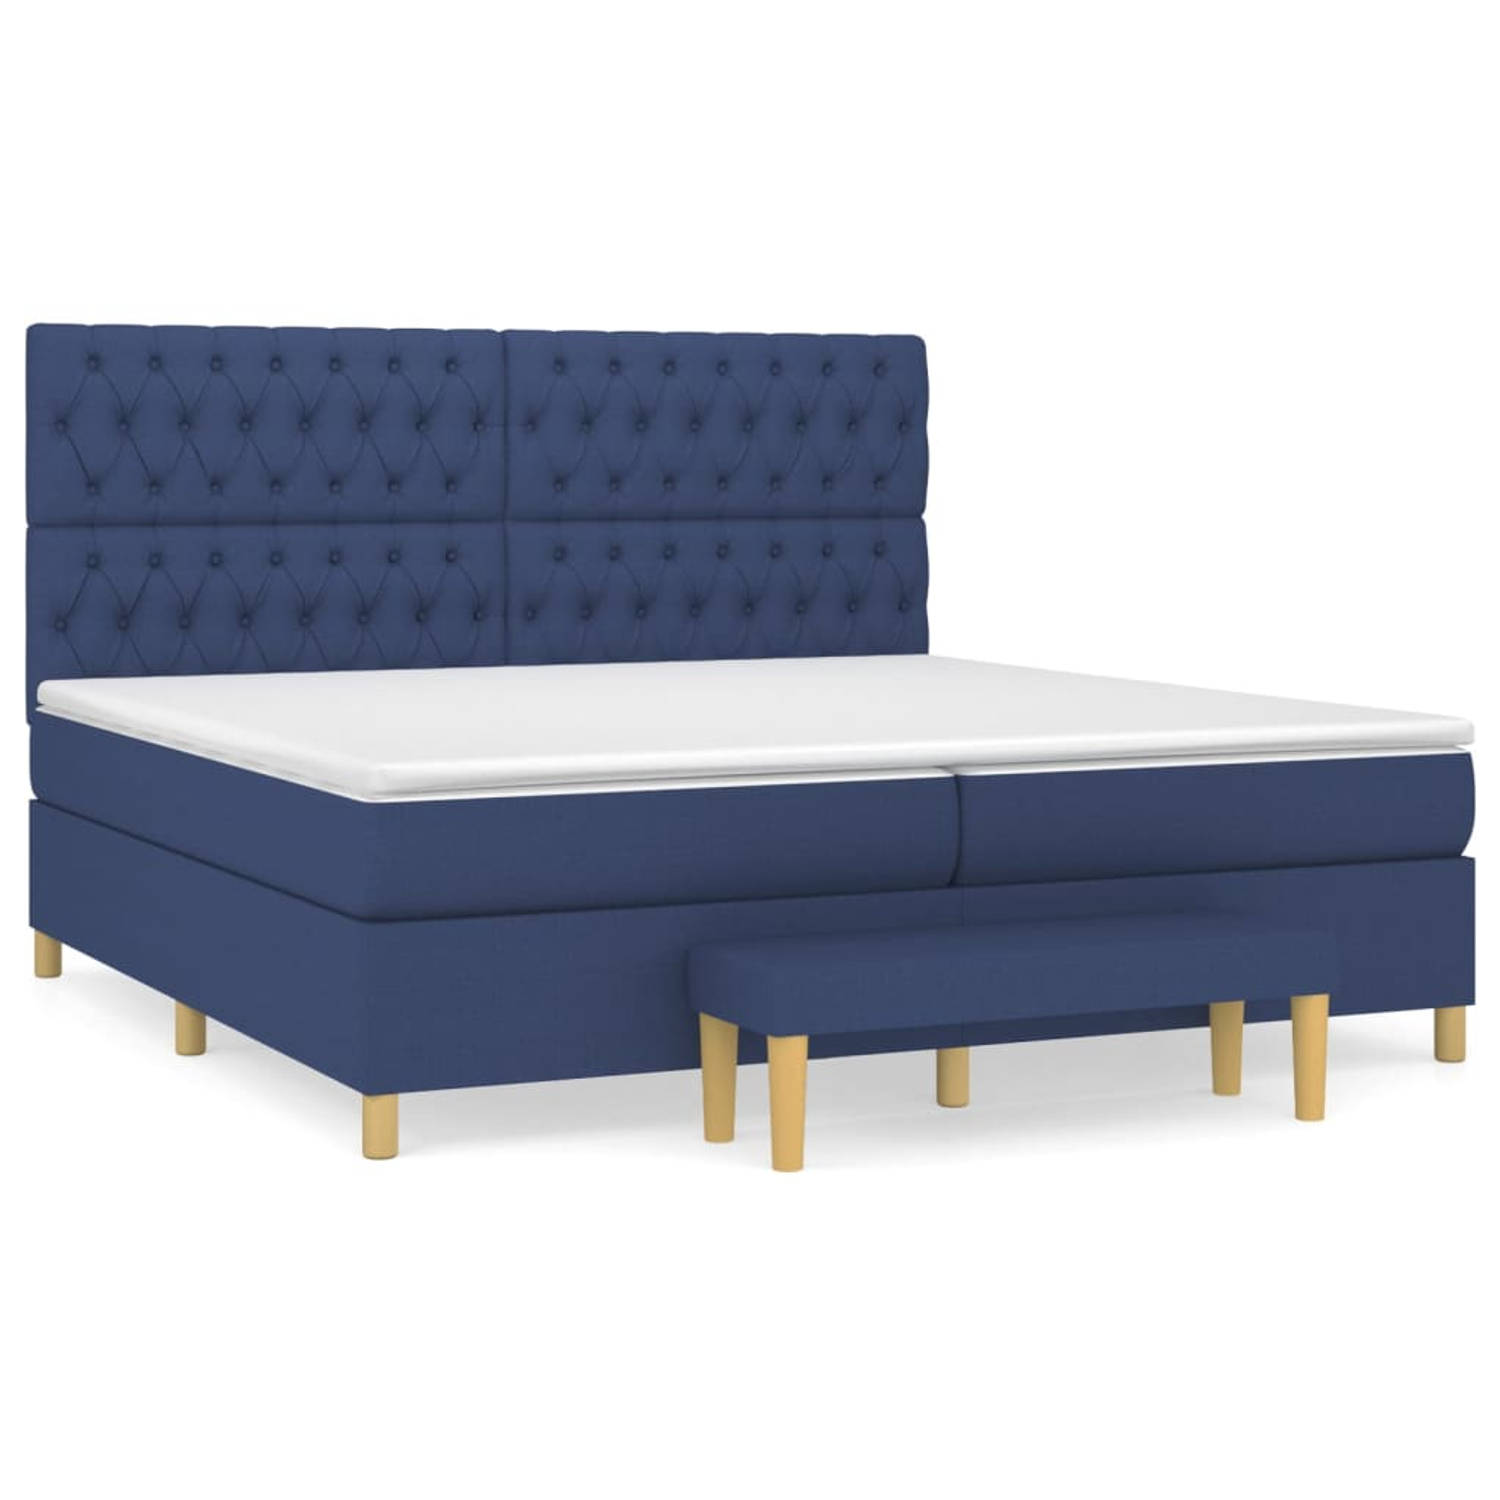 The Living Store Boxspring met matras stof blauw 200x200 cm - Boxspring - Boxsprings - Pocketveringbed - Bed - Slaapmeubel - Boxspringbed - Boxspring Bed - Eenpersoonsbed - Bed Met